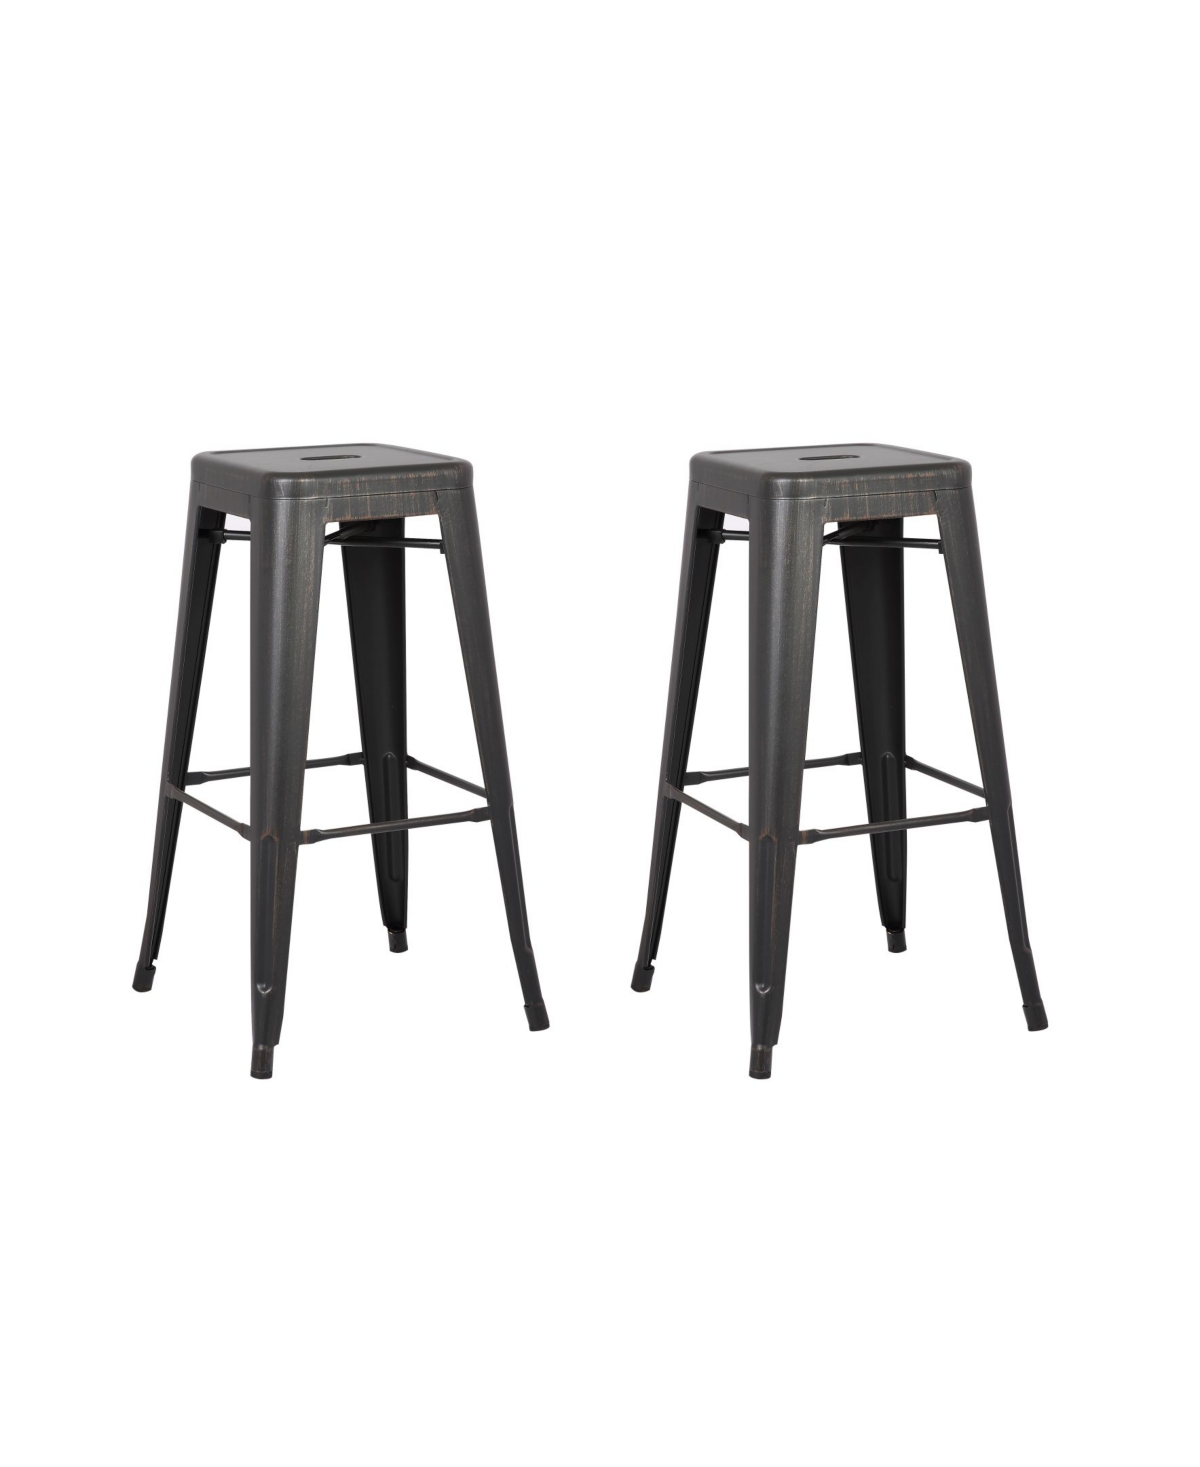 Ac Pacific Backless Industrial Metal Bar Stool, Set of 2